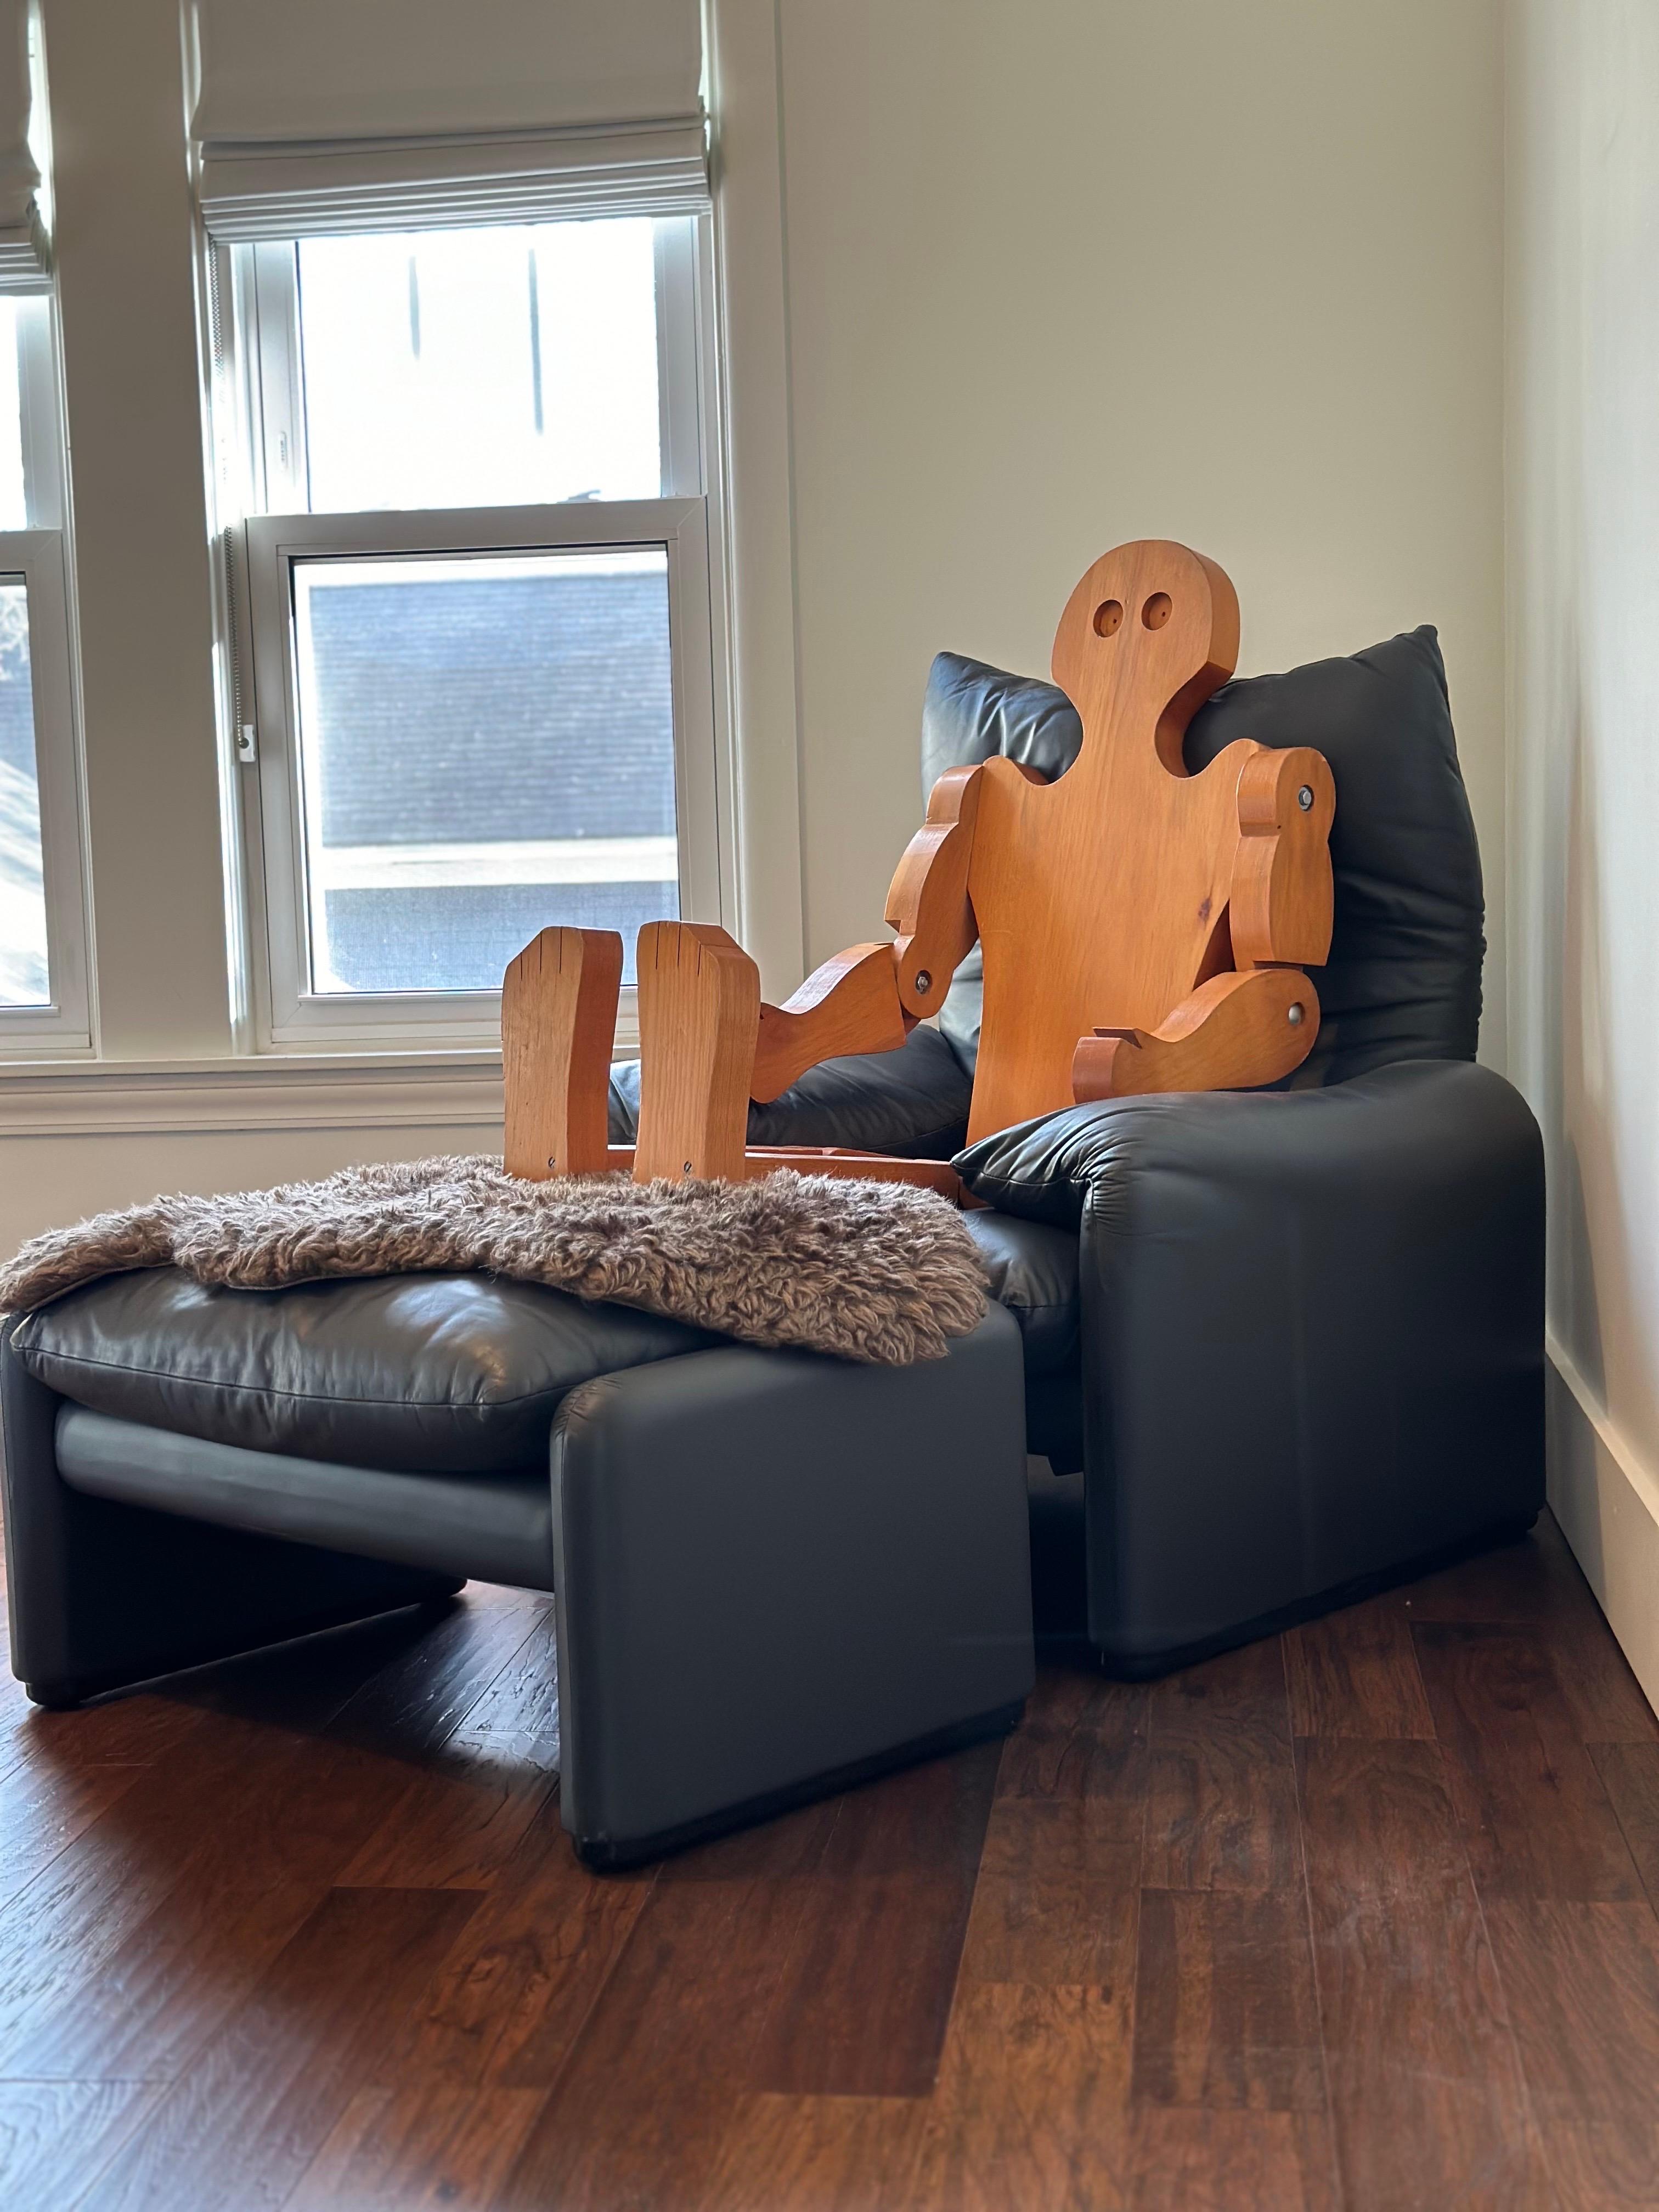 We are very pleased to offer a Folk Art wooden articulated man, circa the 1950s.  This nearly 5-foot tall, handcrafted piece, epitomizing Mid-century American craftsmanship, is made entirely from wood.  It boasts articulated and posable joints,